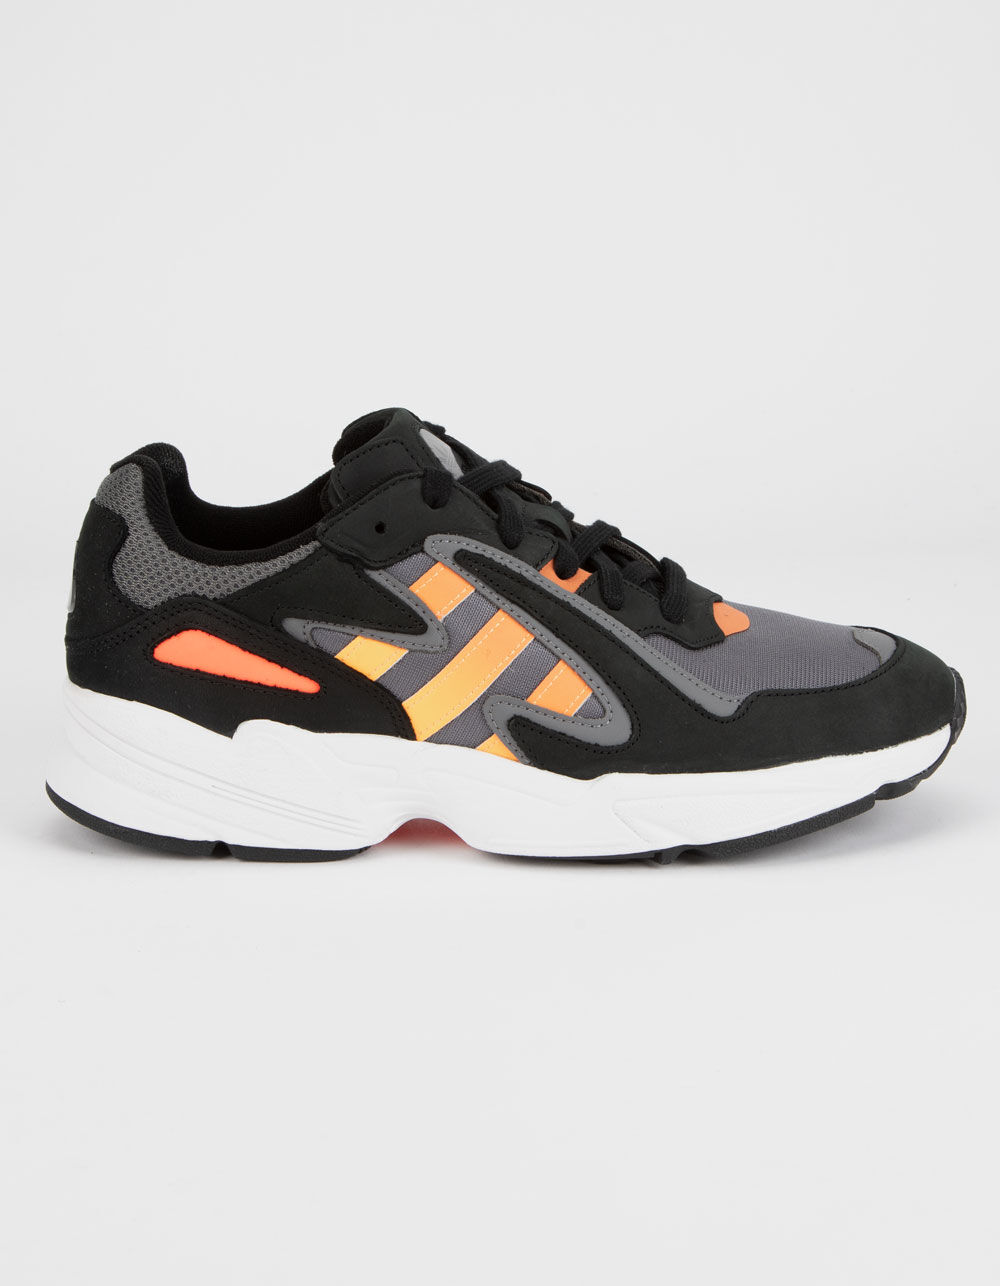 ADIDAS Yung-96 Chasm Core Black & Sol Red Shoes - CORE BLACK/SOL RED ...